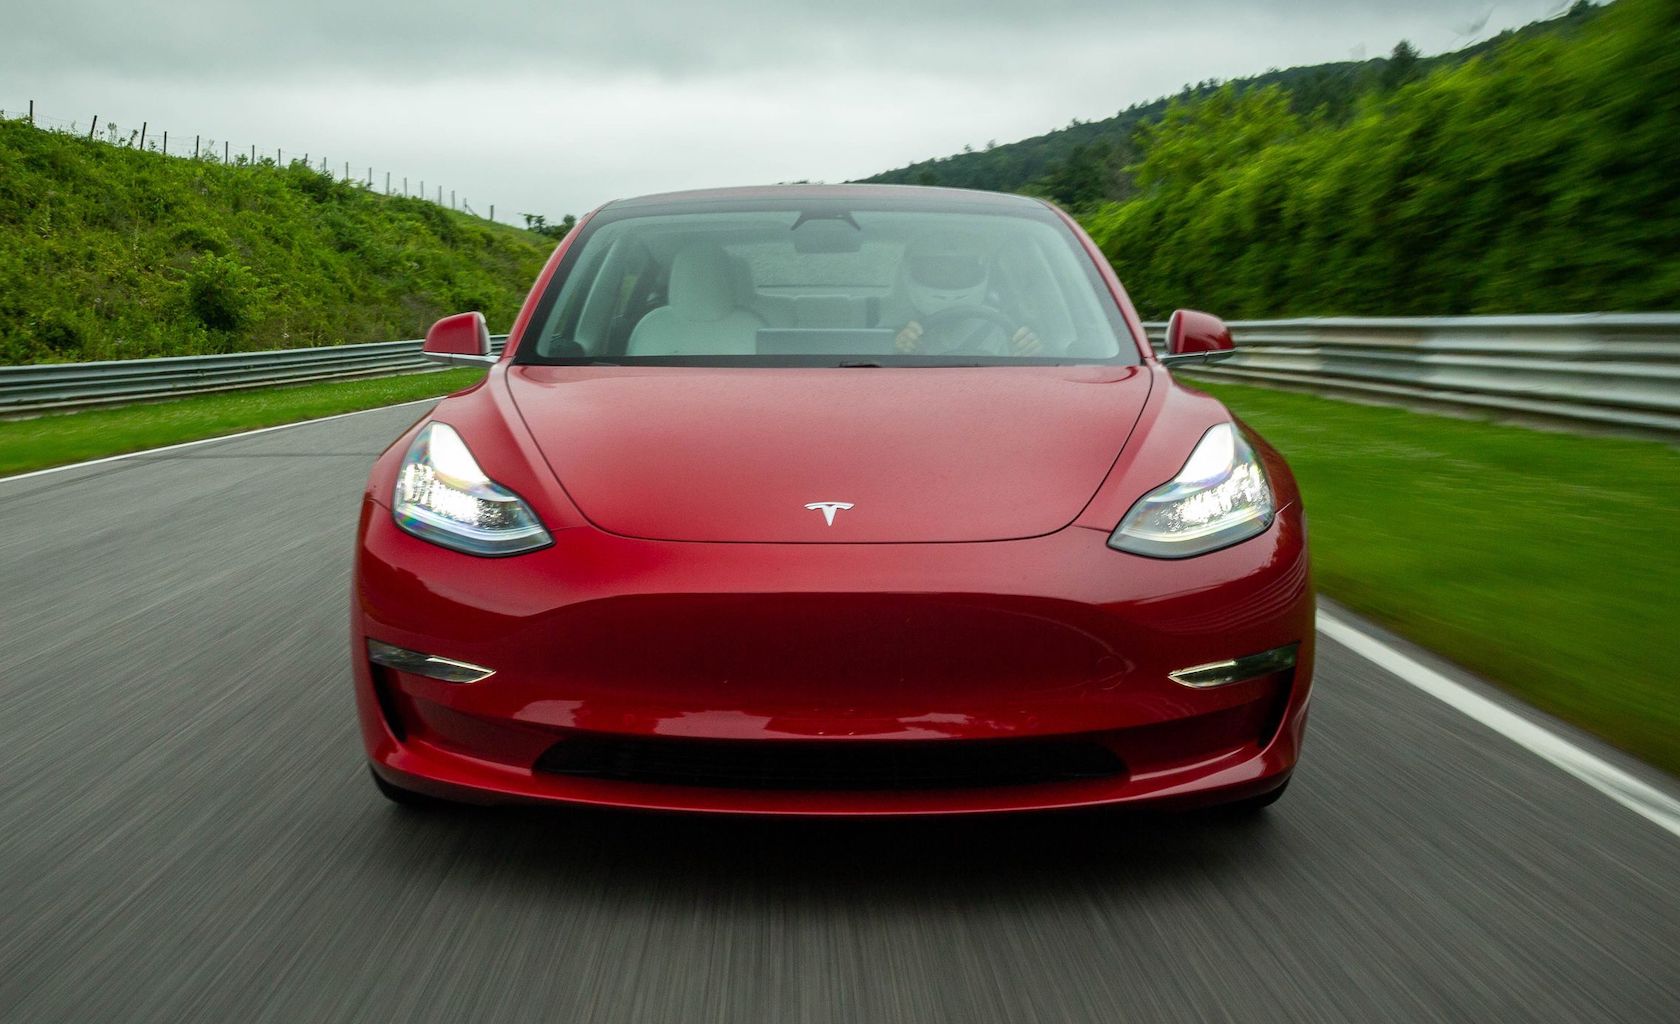 New Tesla Model 3 - what's changed? 